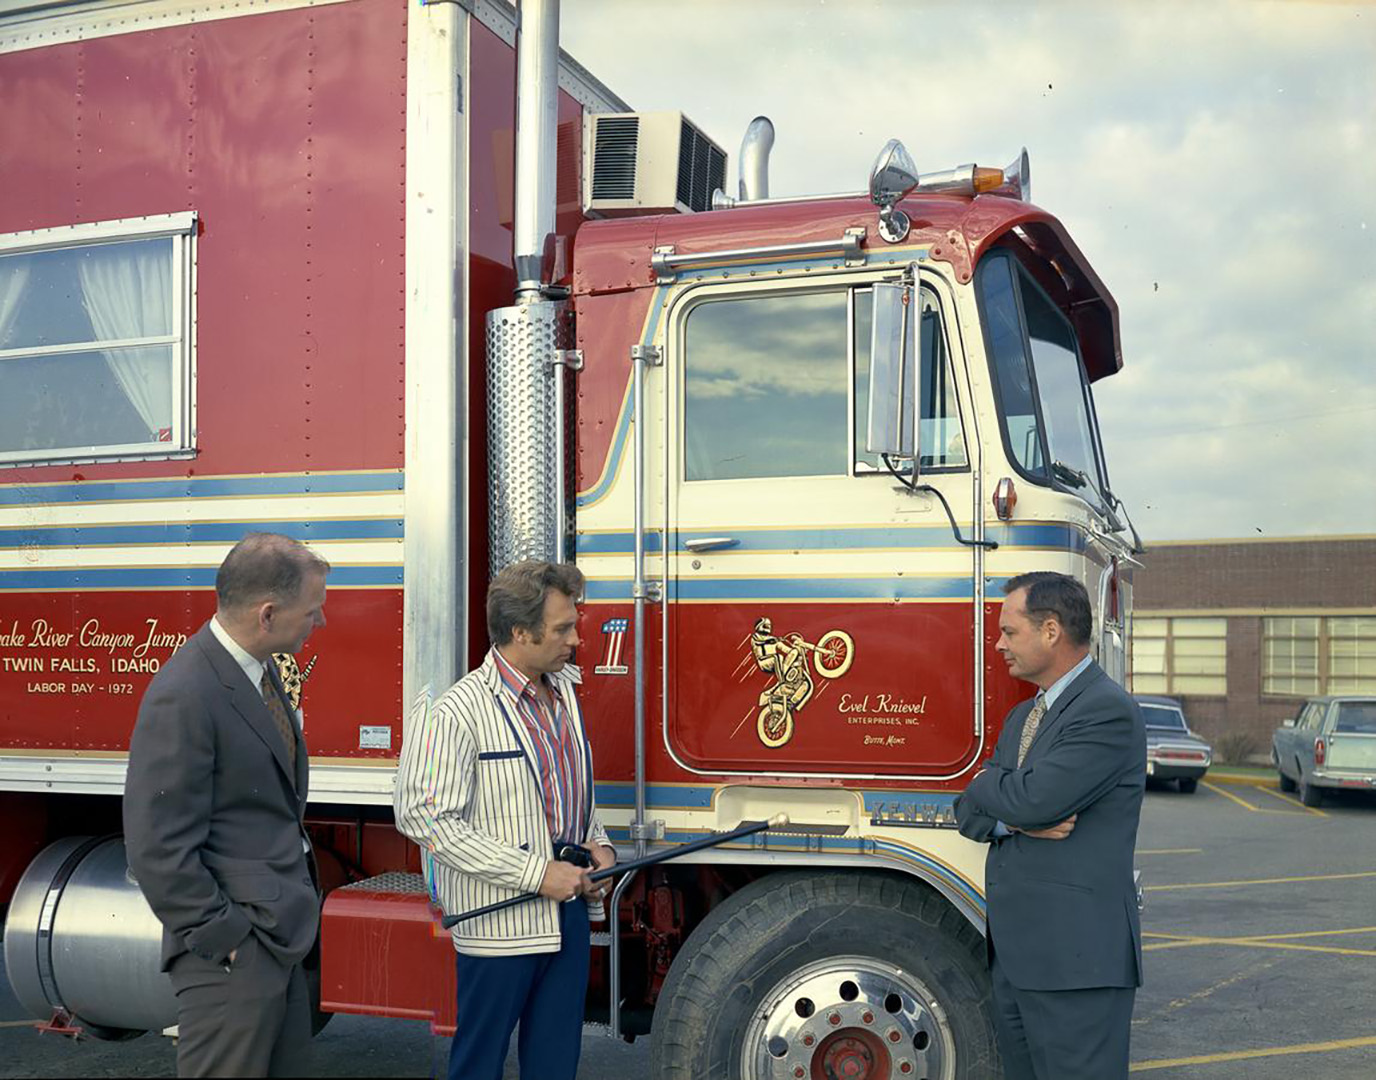 Kenworth truck and Evel Kneivel 1971